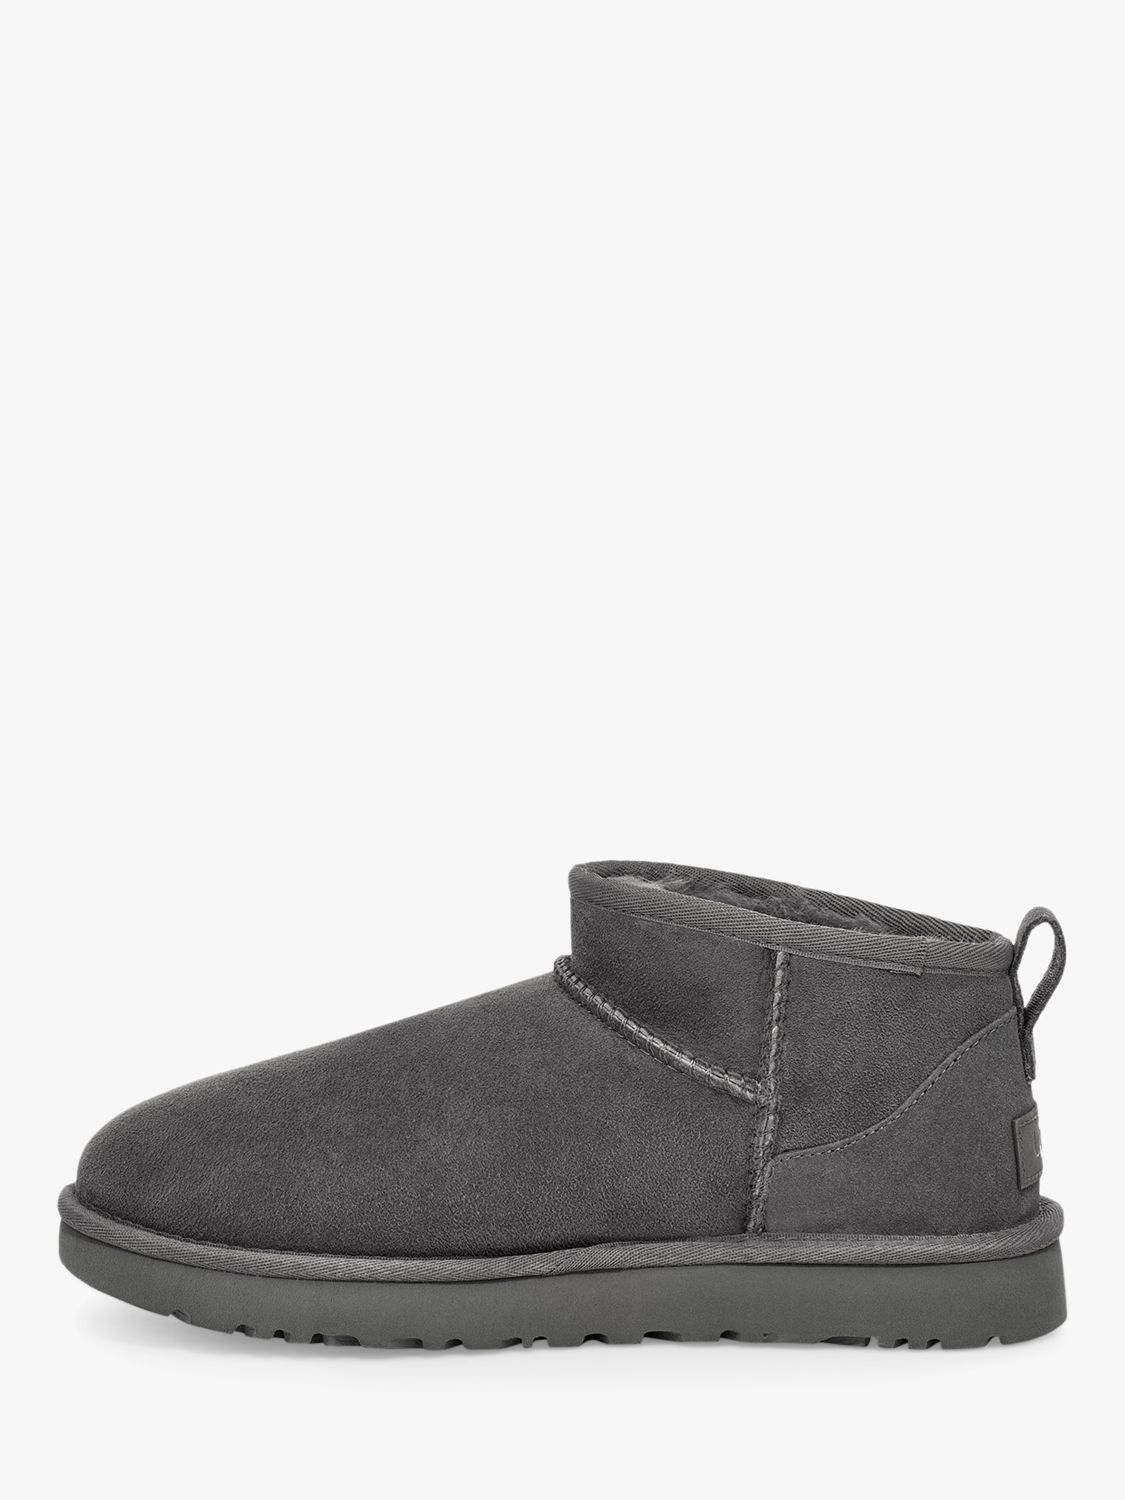 UGG Classic Ultra Mini Sheepskin and Suede Ankle Boots, Grey at John ...